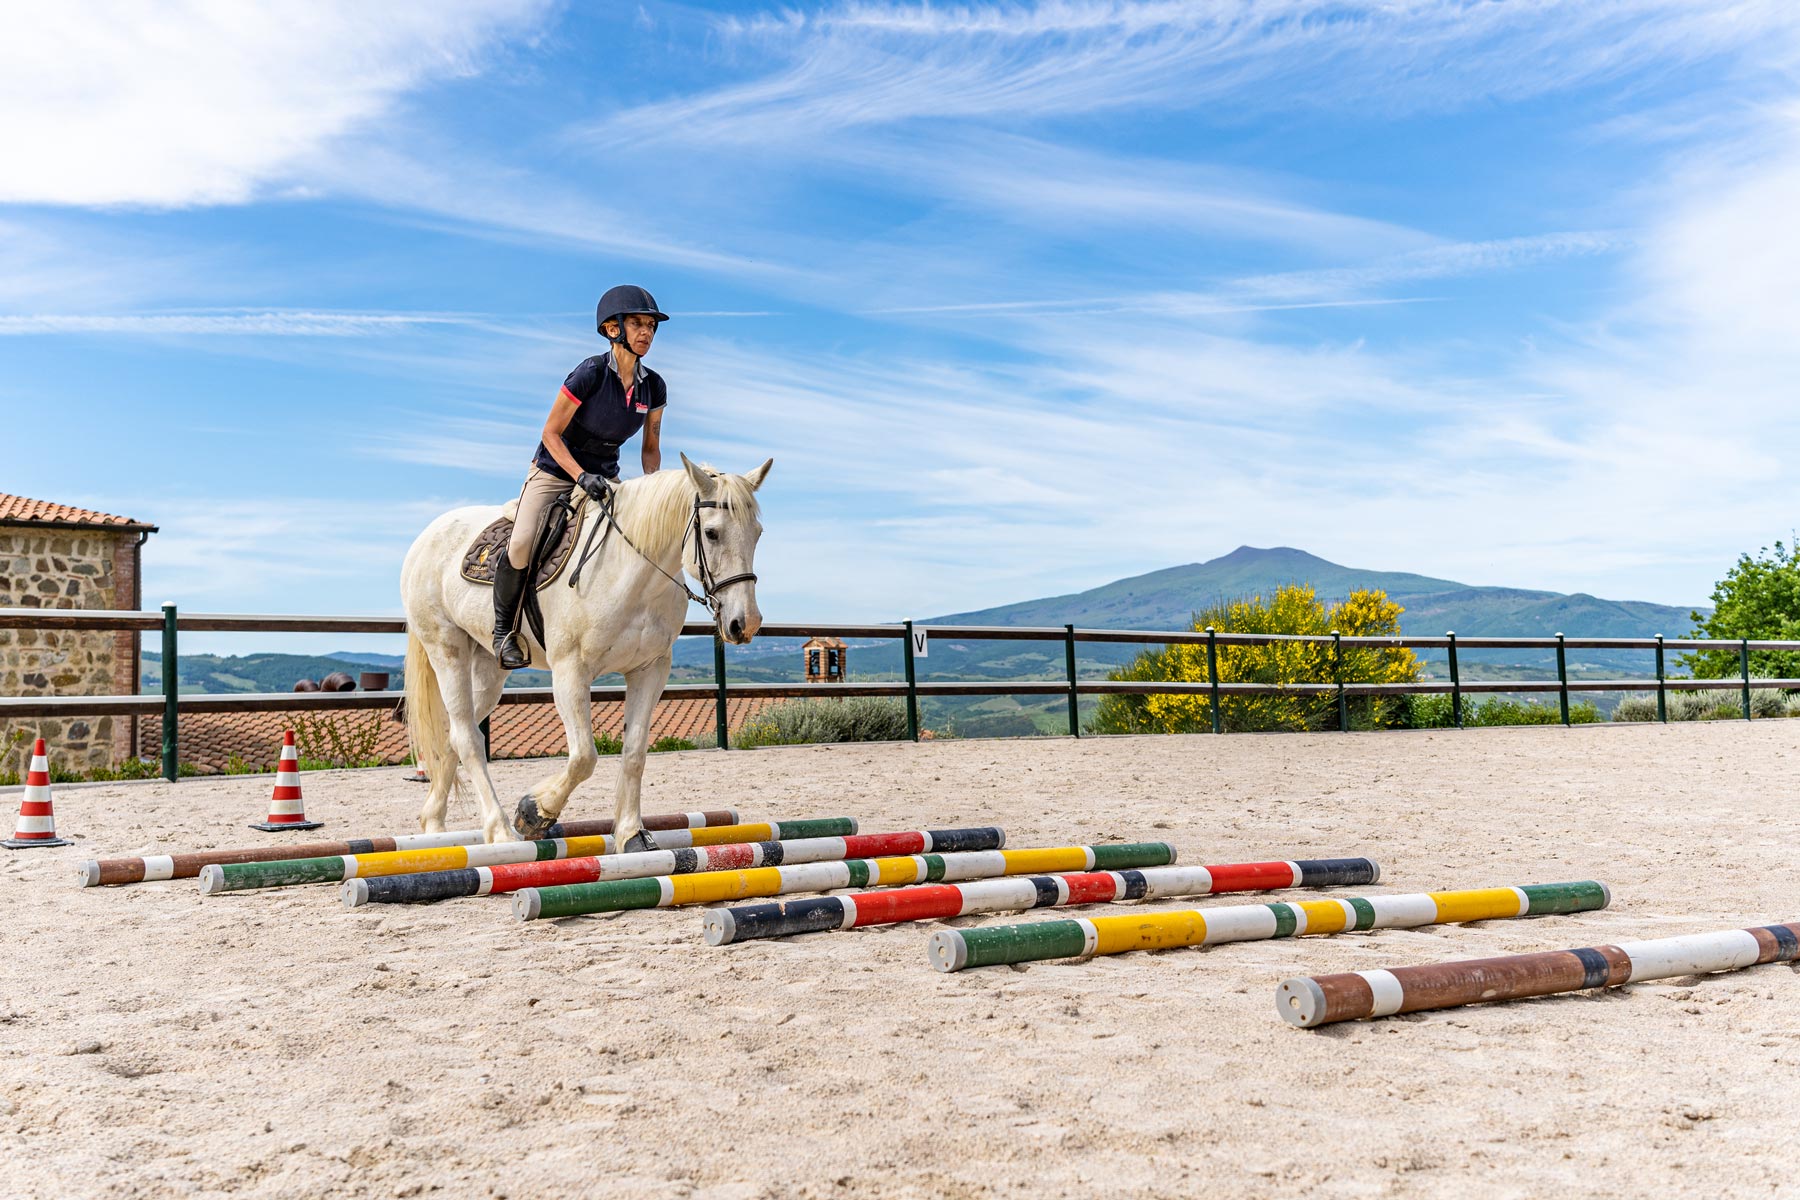 Accademia Equestre in Toscana